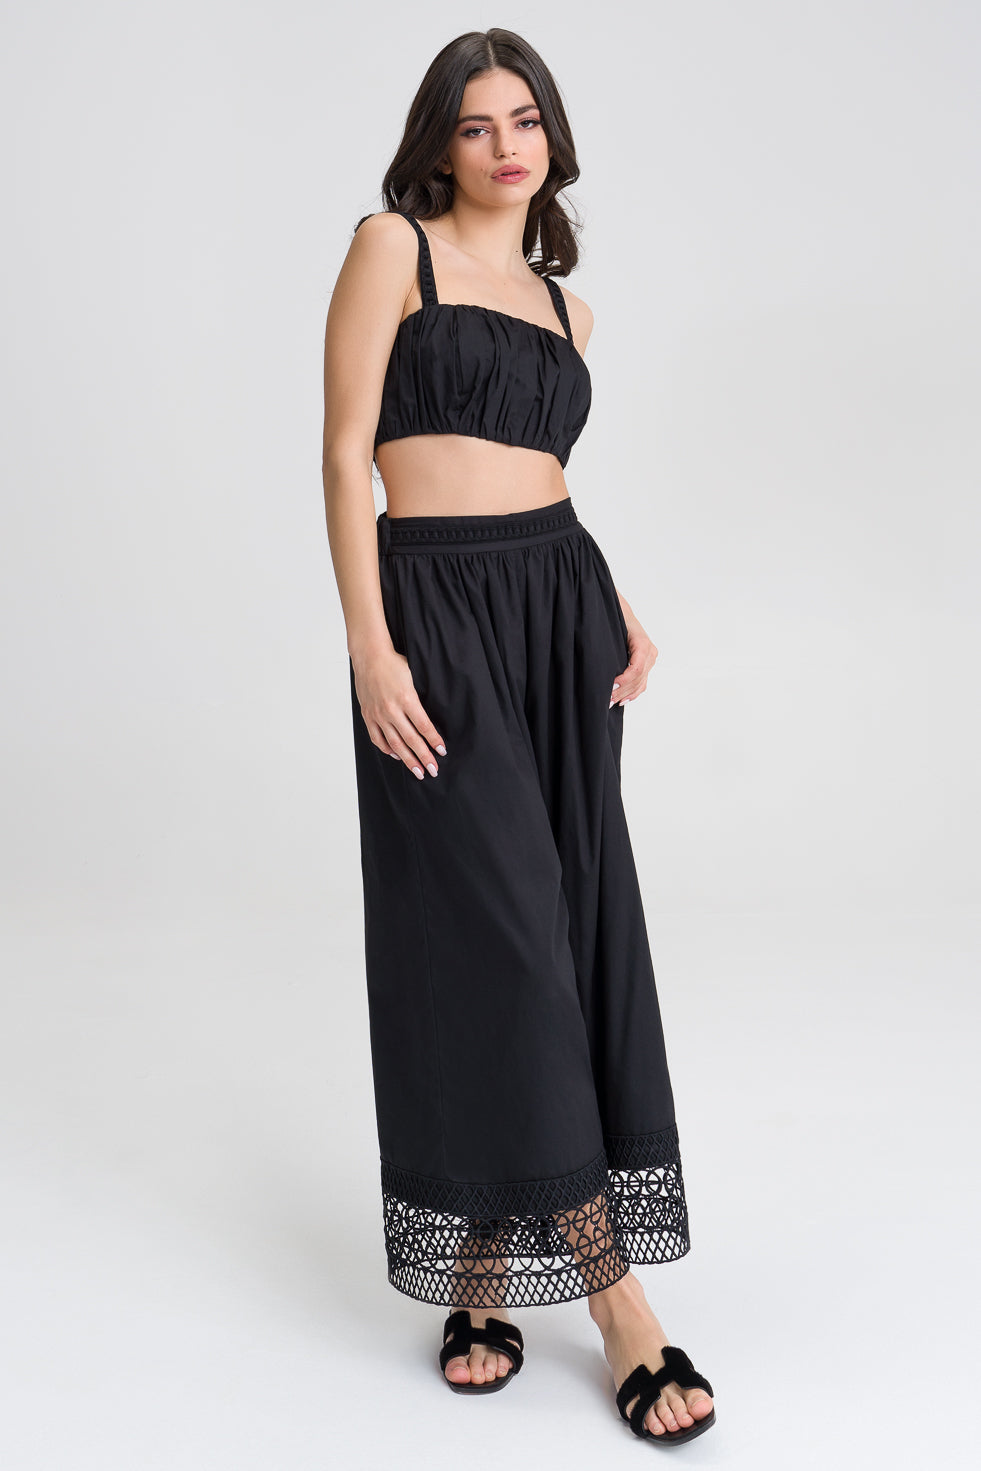 Sadie Black cotton blend embroided wide pants